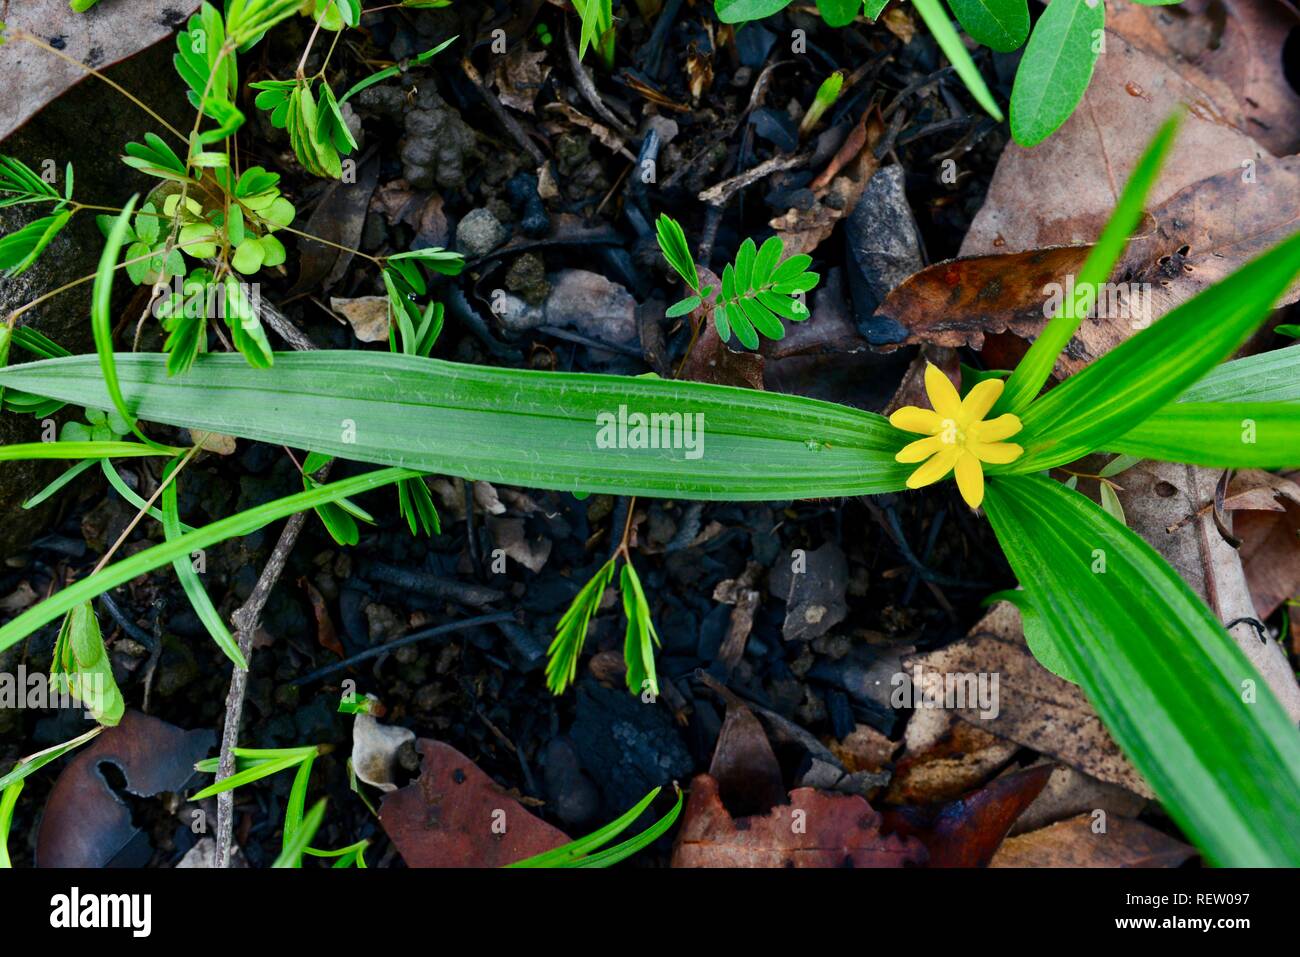 Yellow flower in regrowth of understorey after a bushfire,  Mia Mia State Forest, Queensland, Australia Stock Photo